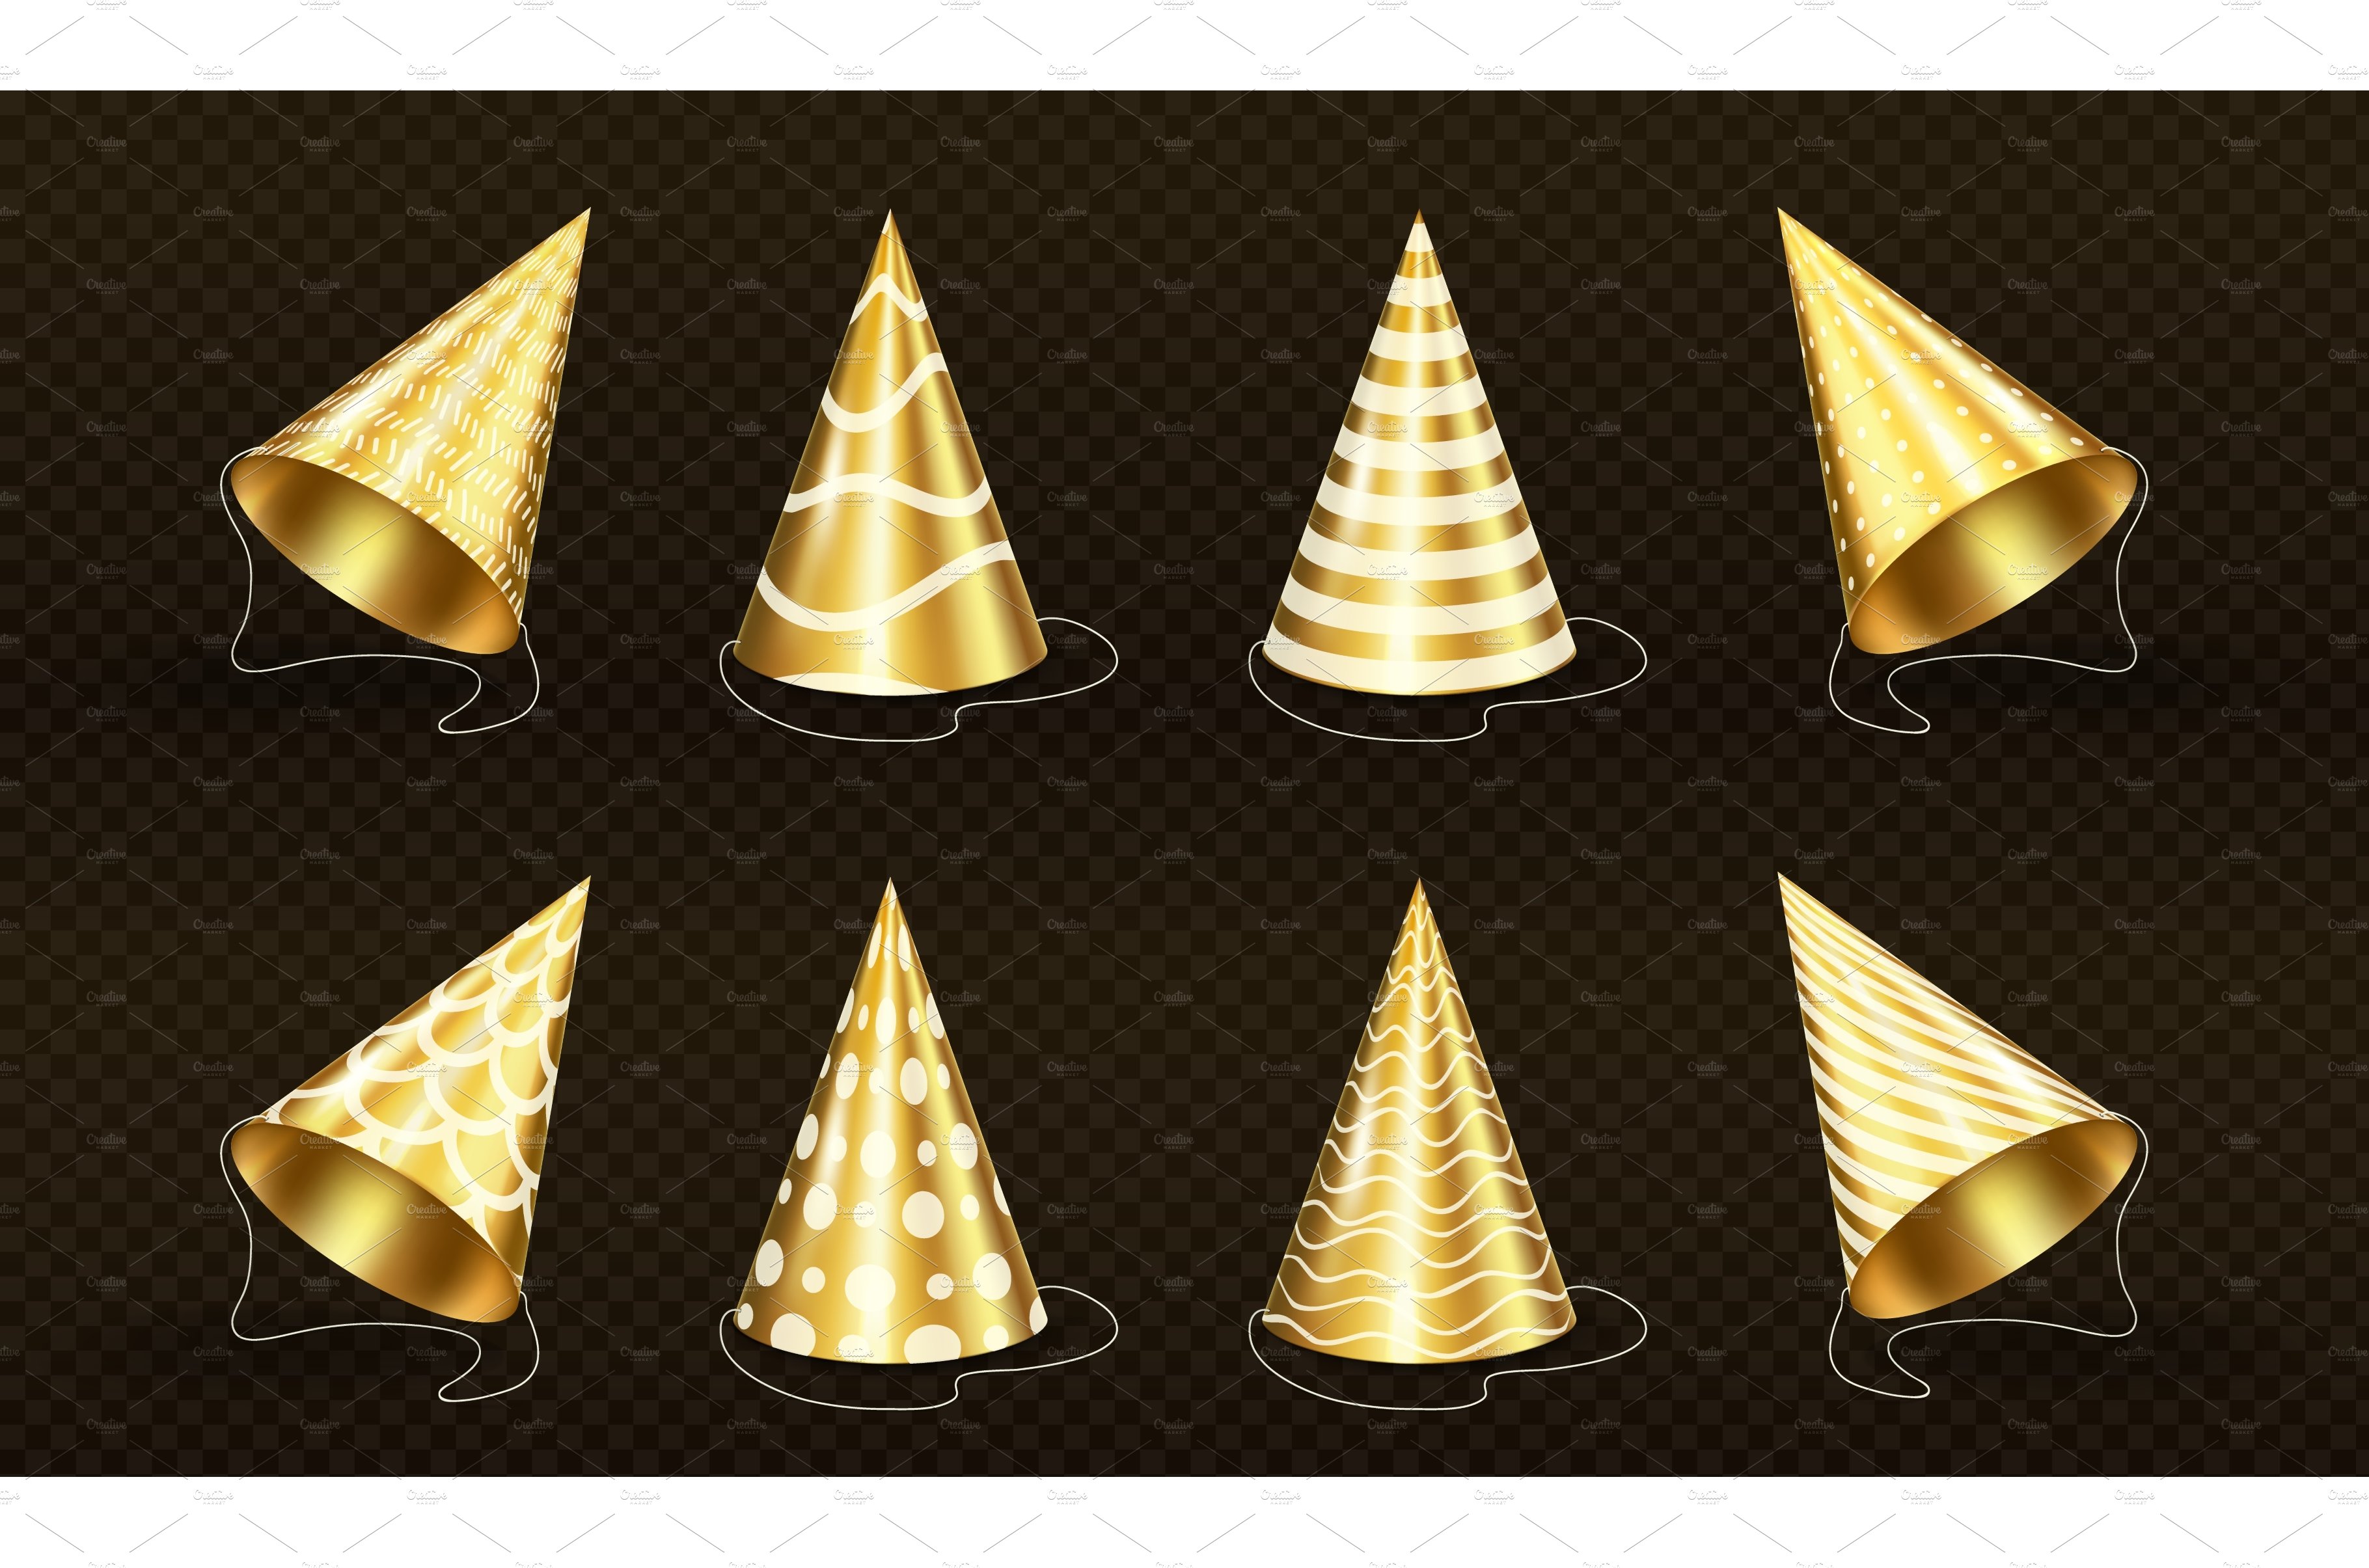 Golden party hats with patterns cover image.